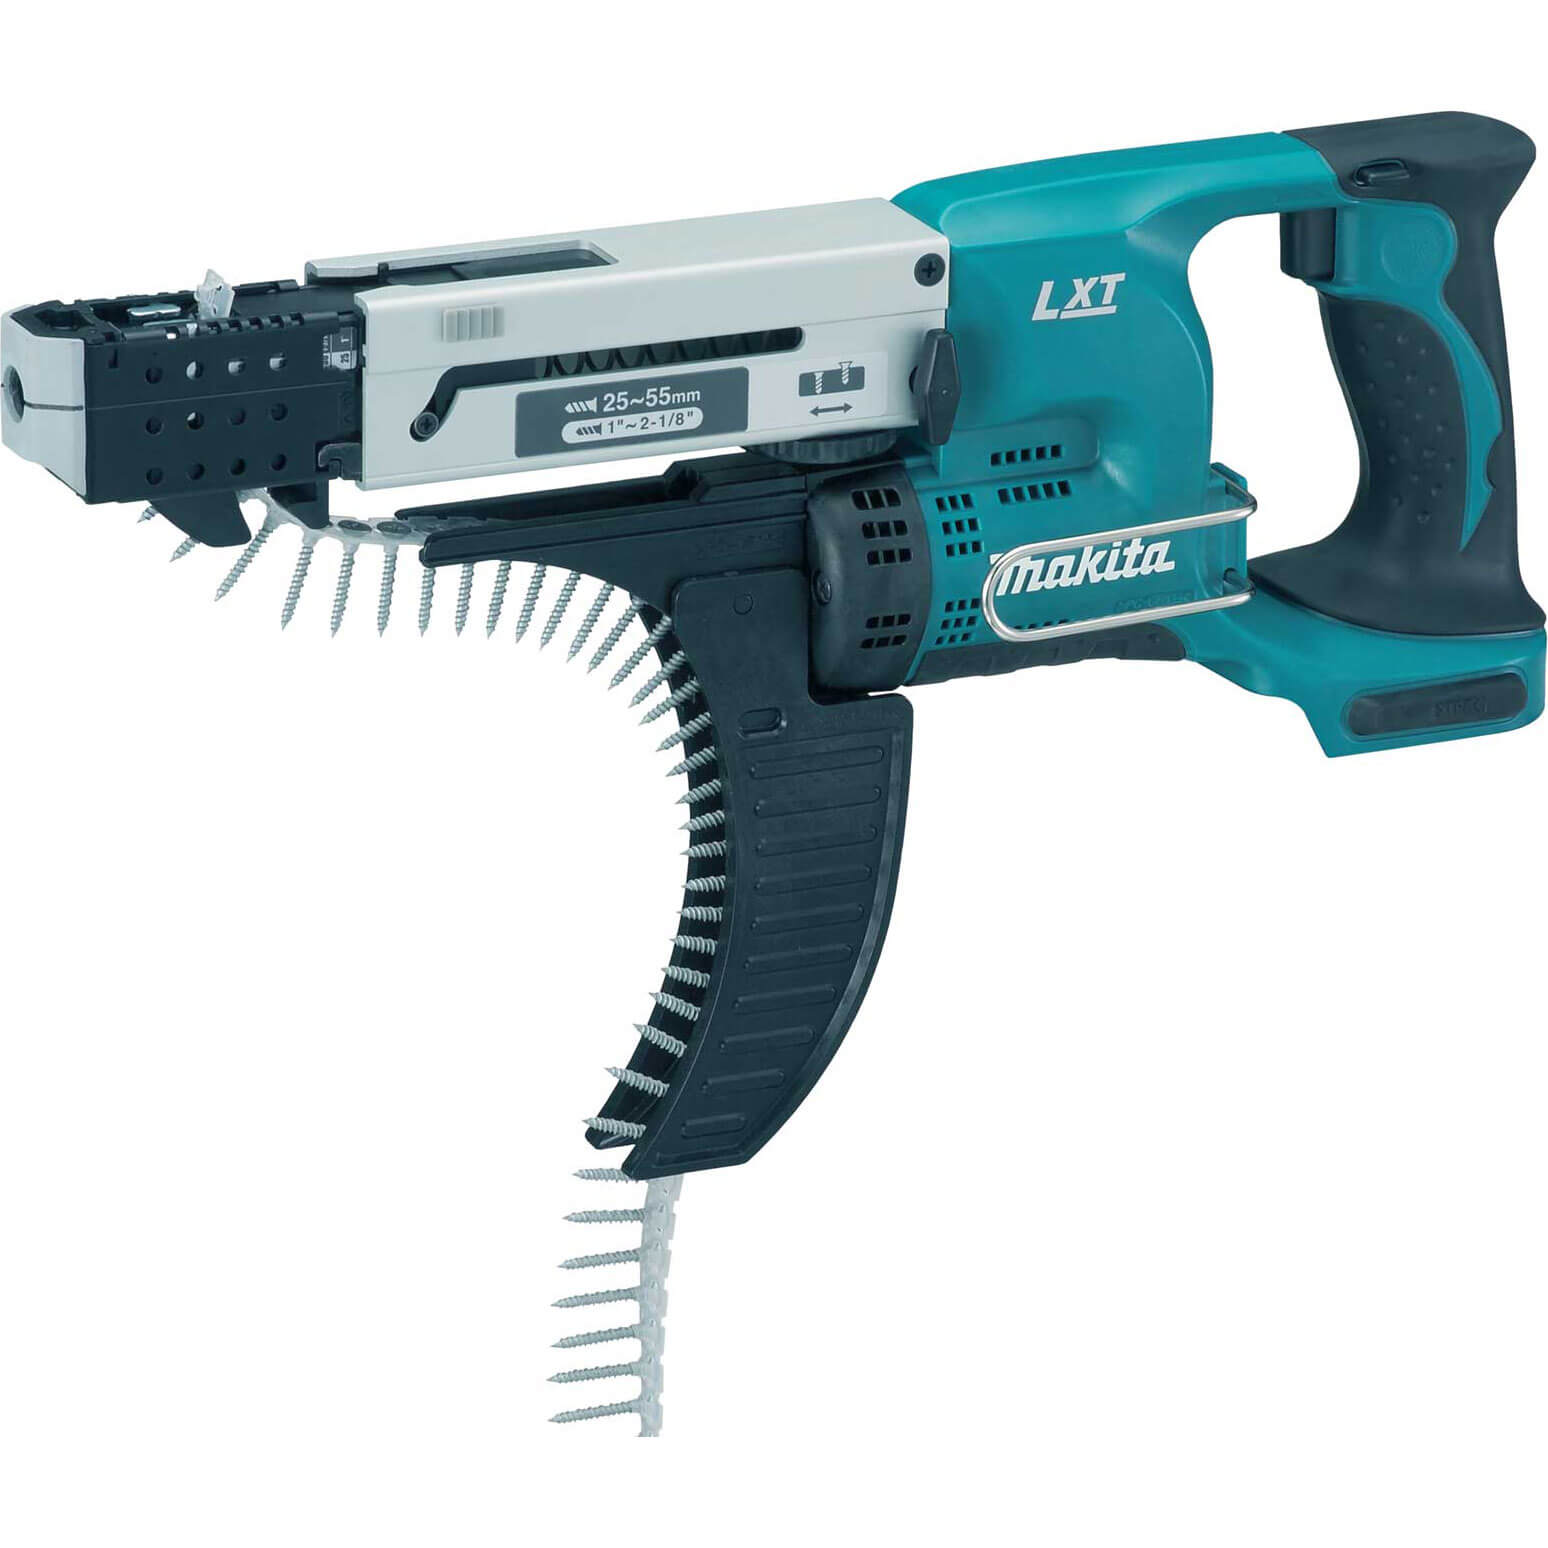 Image of Makita DFR550 18v LXT Cordless Auto Feed Screwdriver No Batteries No Charger No Case